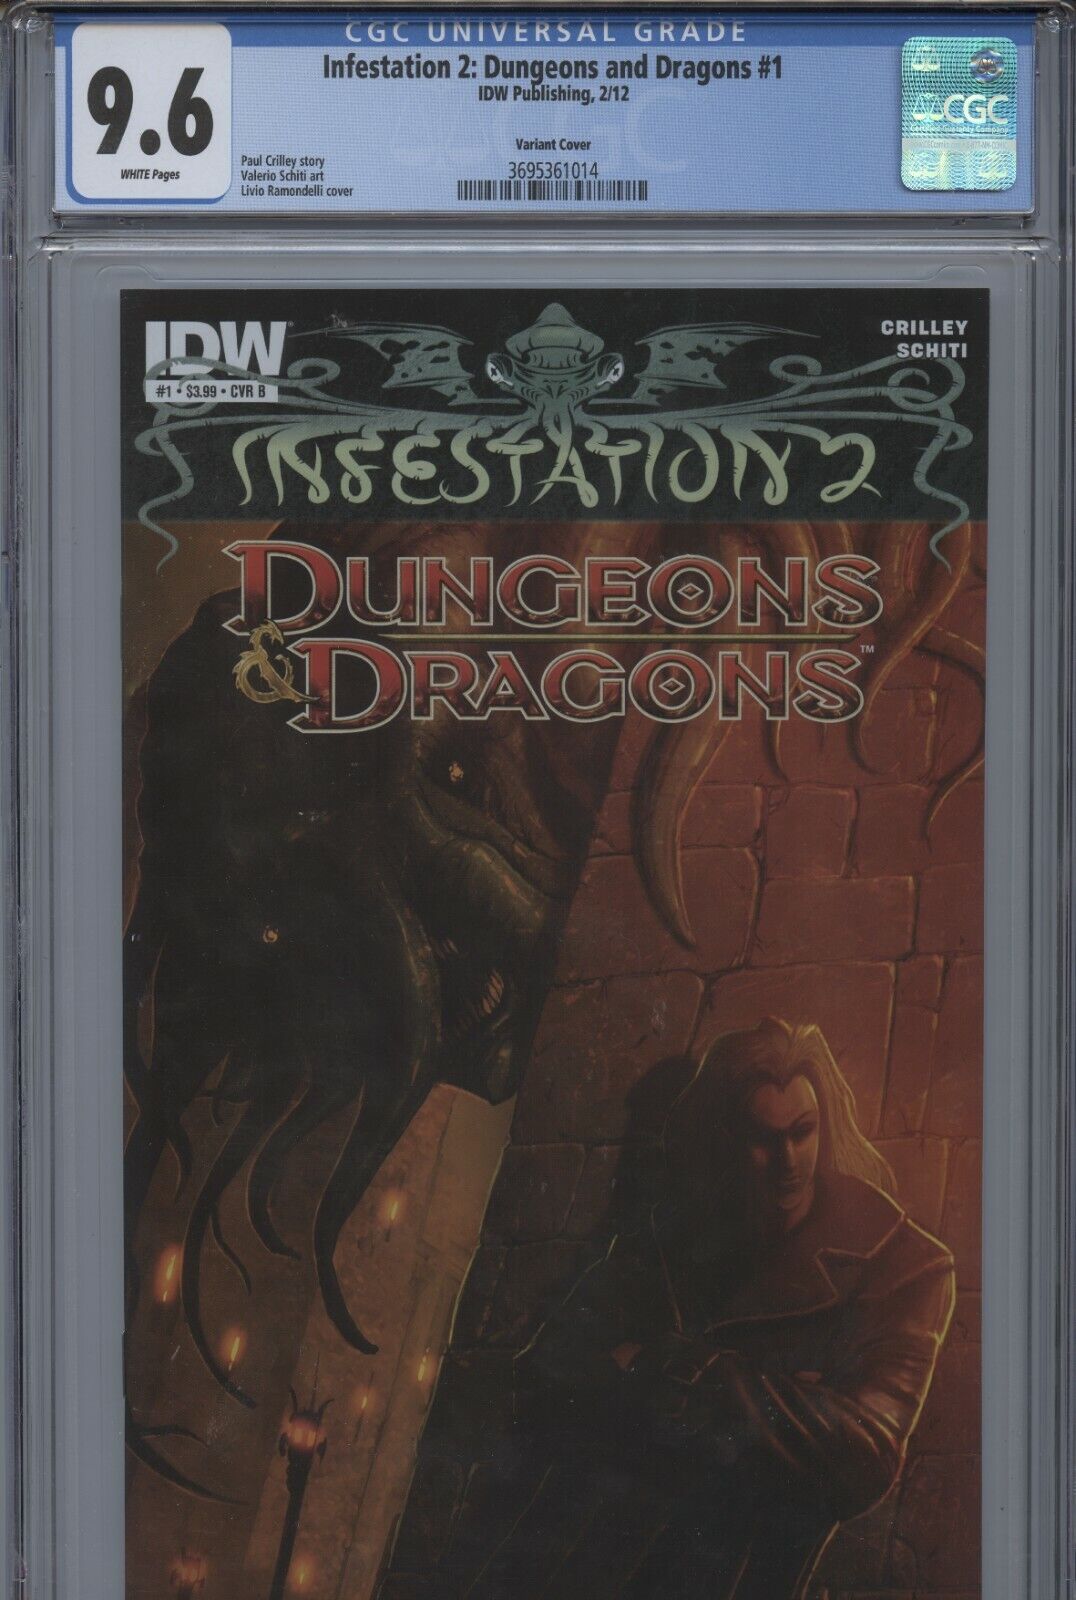 Infestation 2 Dungeons & Dragons #1 VARIANT CGC 9.6 White Pages POP 2 w/0 Better